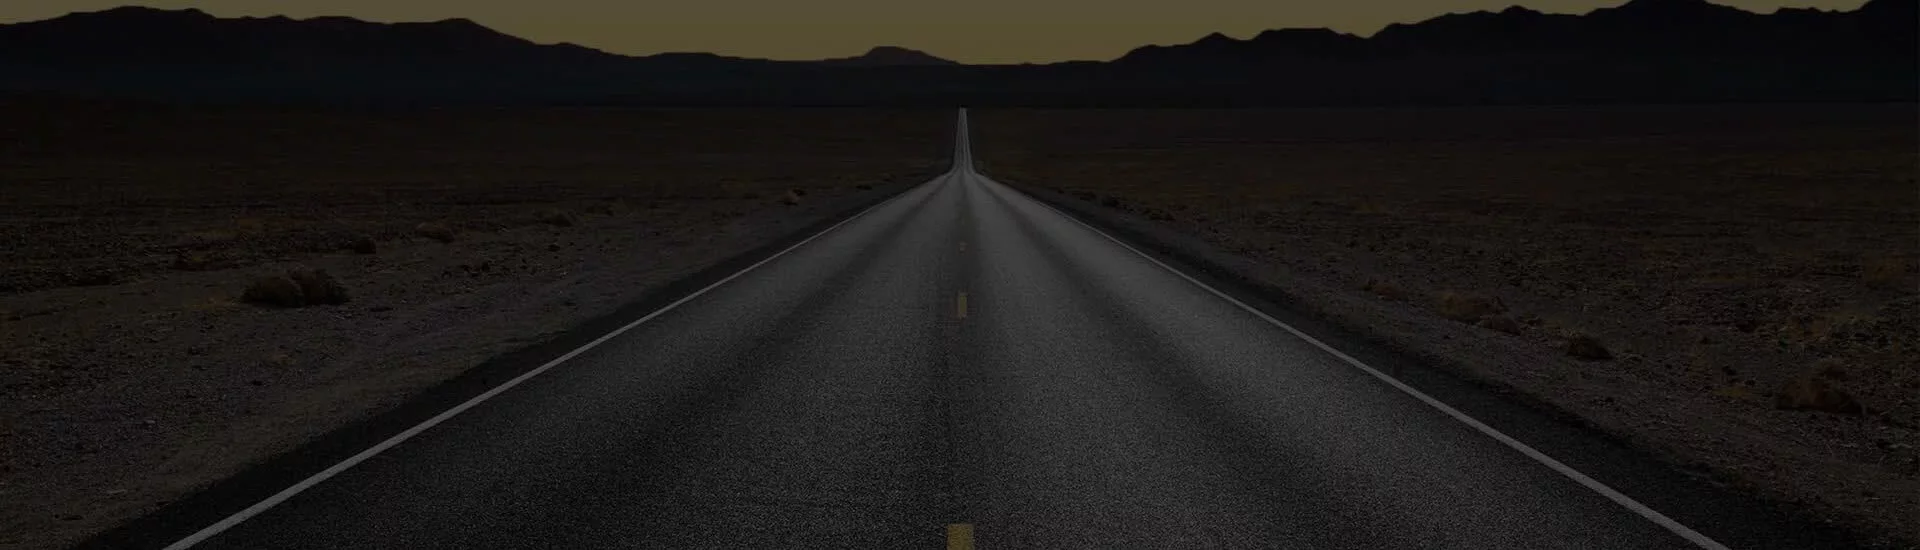 an empty road in the middle of nowhere